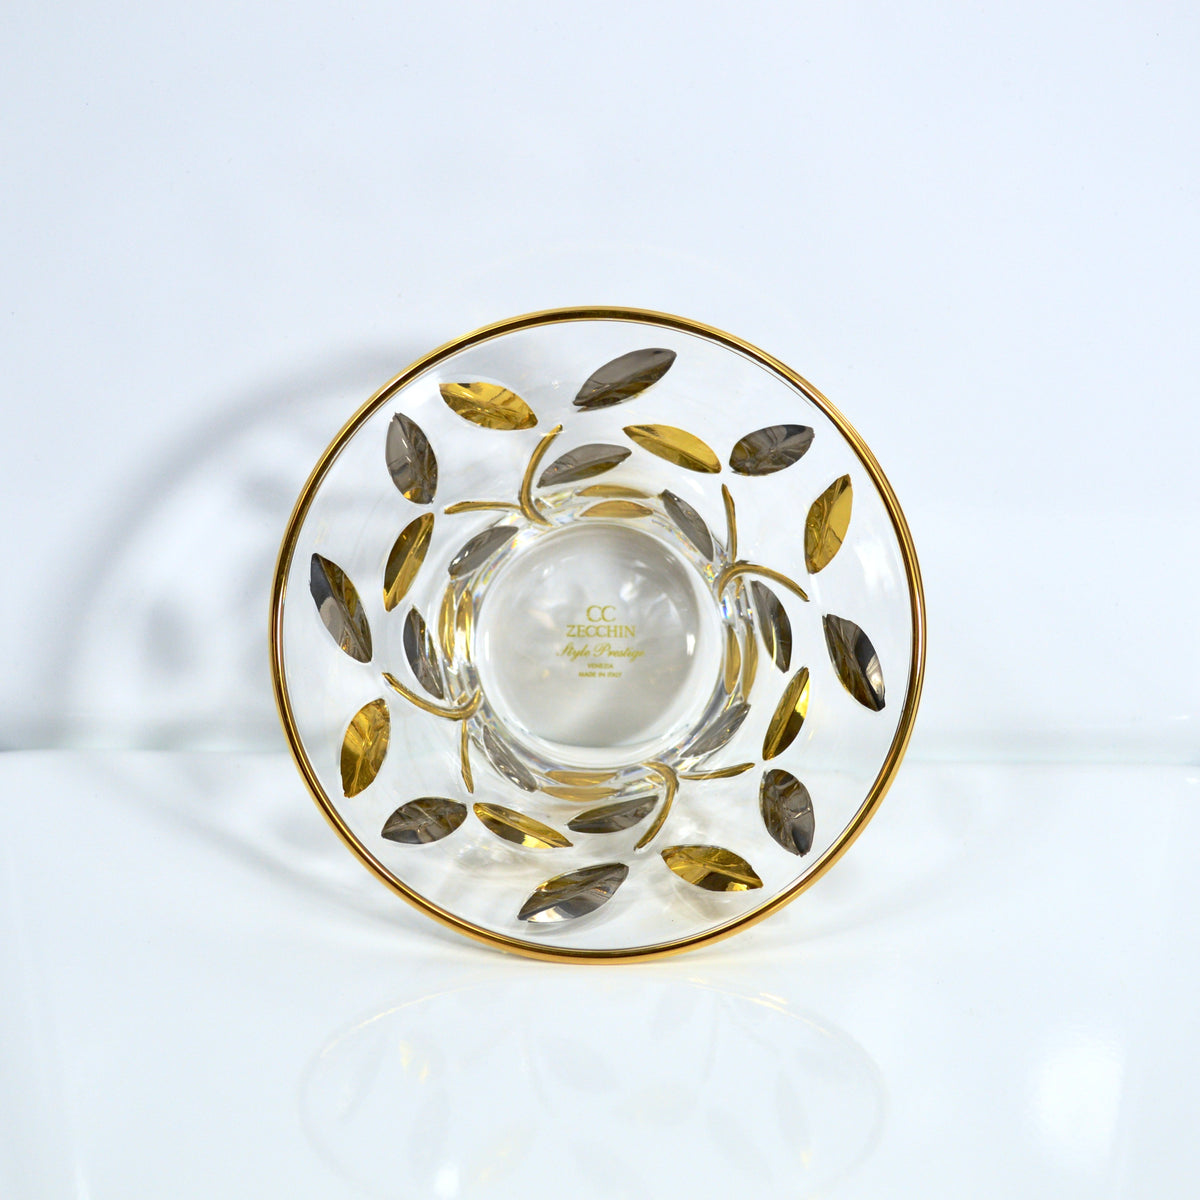 Flowervine Candy Bowl, Hand Painted Platinum and Gold - My Italian Decor